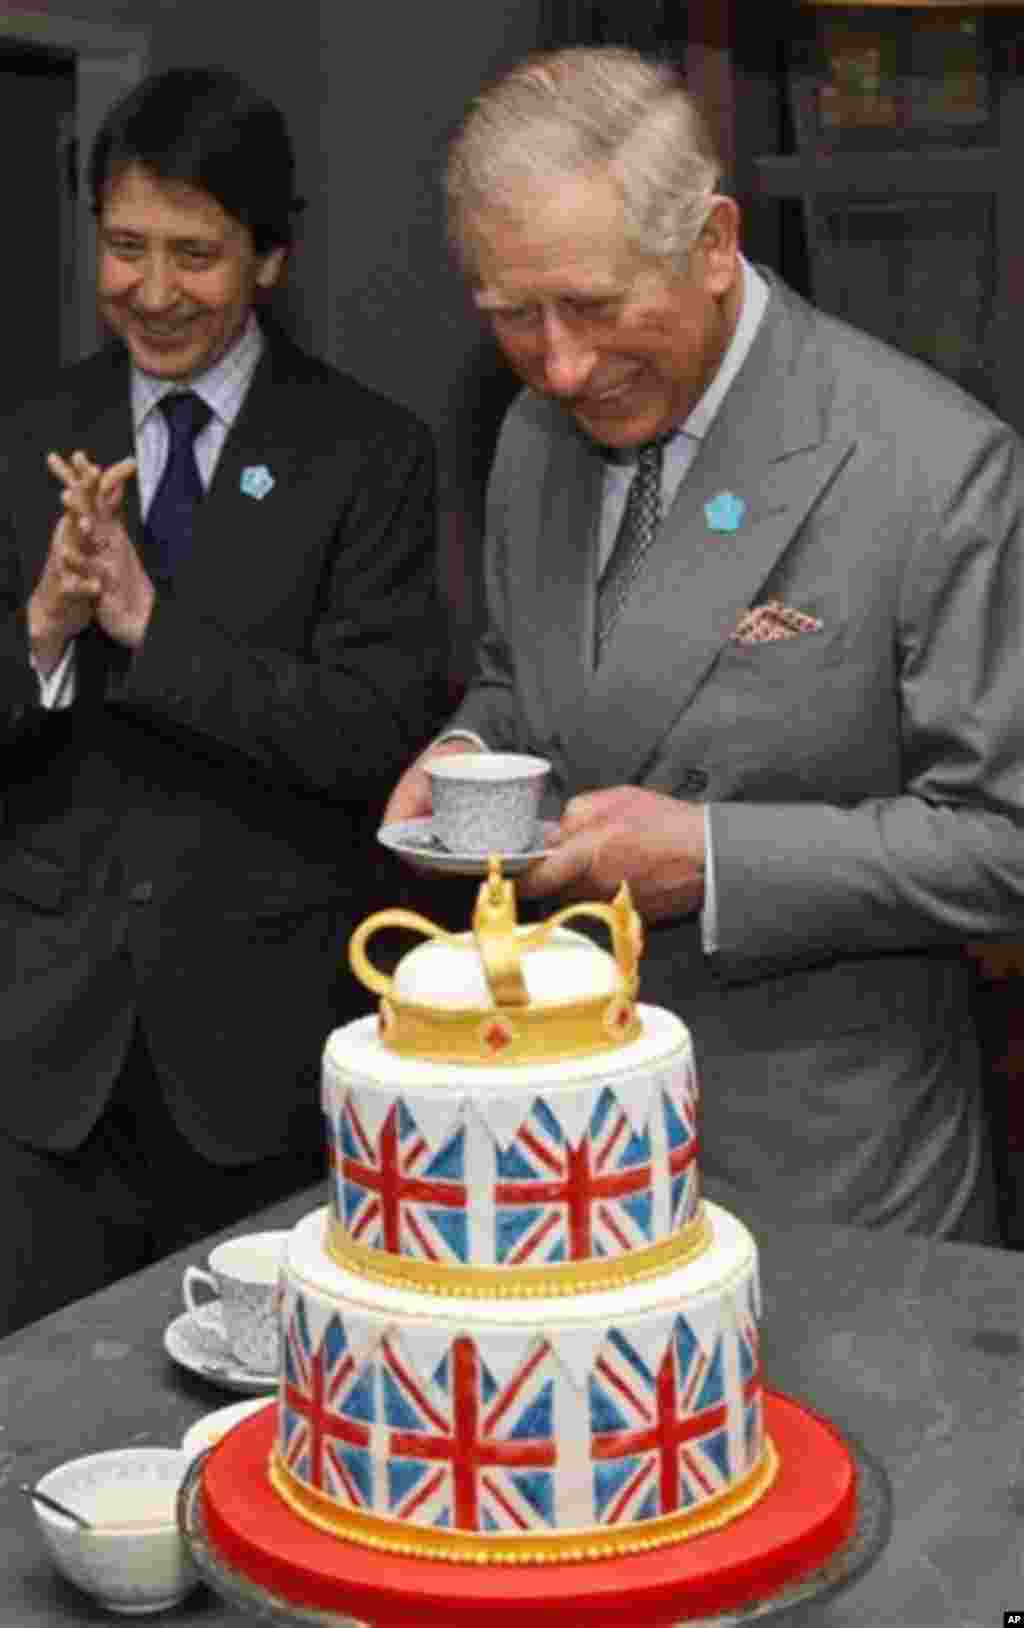 Britain's Prince Charles, right, partakes in a cup of tea during his visit at the Ideal Home Show, in London, Friday, March 16, 2012. The Prince, who visited the show last year, will formally open the 17 day event, which is now in its 104th year and attr